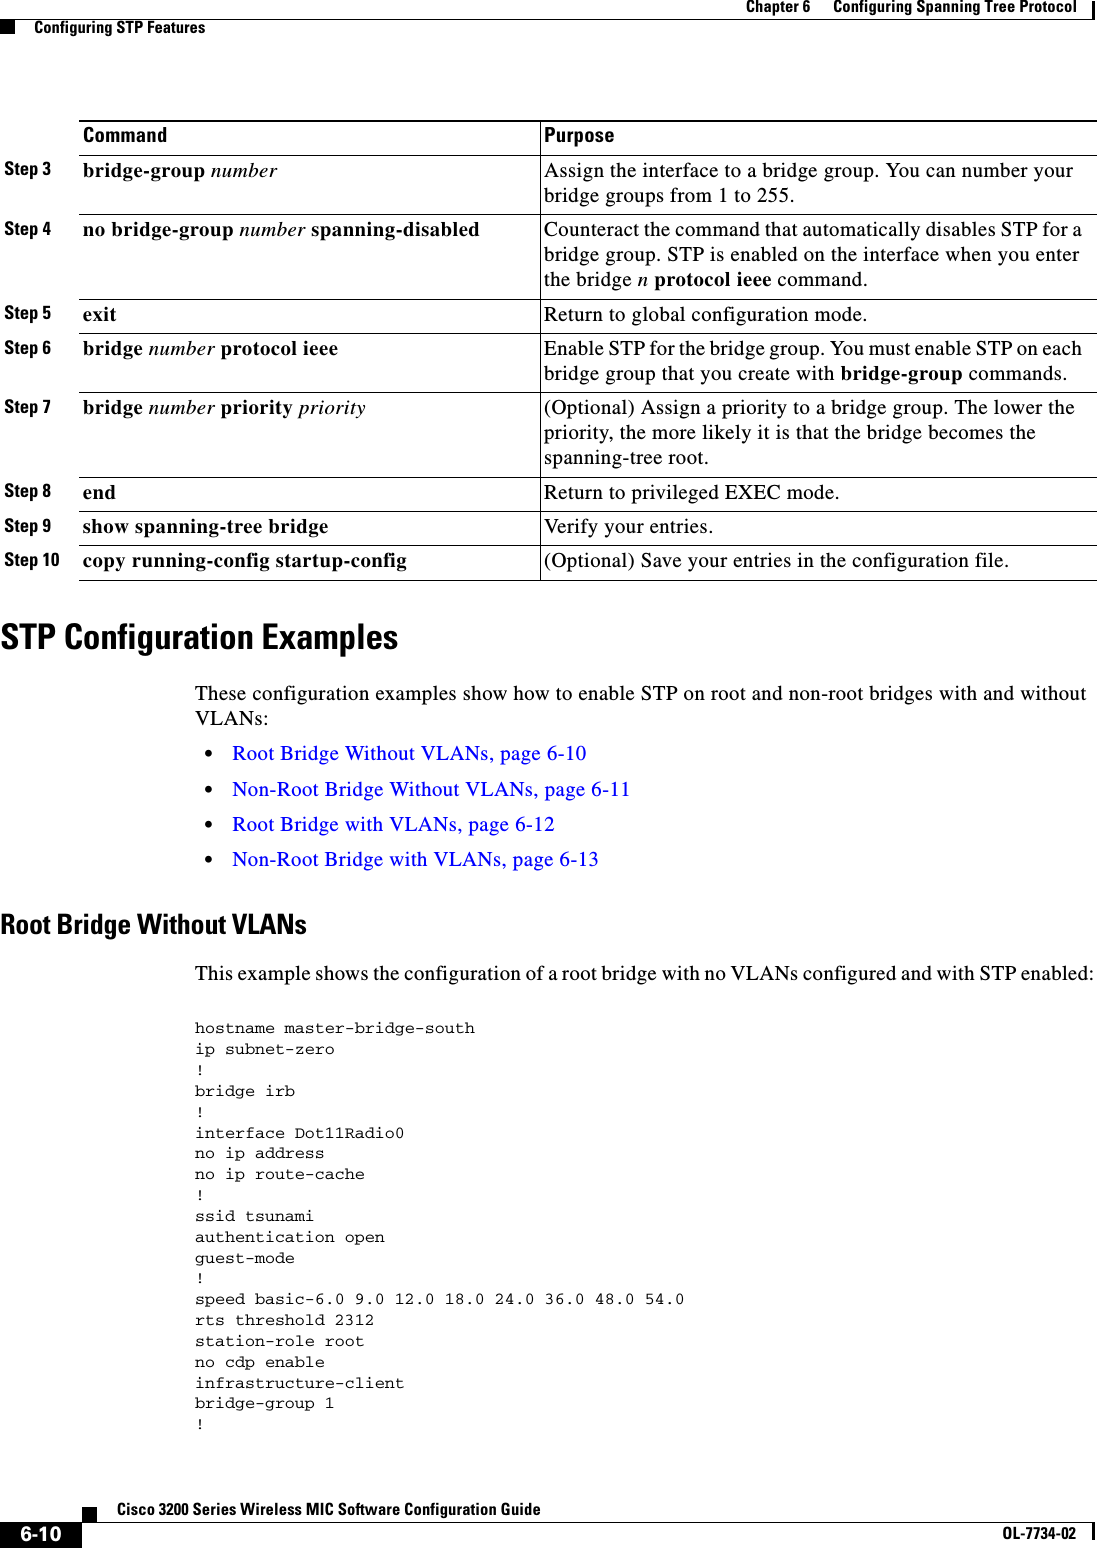 6-10Cisco 3200 Series Wireless MIC Software Configuration GuideOL-7734-02Chapter 6      Configuring Spanning Tree ProtocolConfiguring STP FeaturesSTP Configuration ExamplesThese configuration examples show how to enable STP on root and non-root bridges with and without VLANs:•Root Bridge Without VLANs, page 6-10•Non-Root Bridge Without VLANs, page 6-11•Root Bridge with VLANs, page 6-12•Non-Root Bridge with VLANs, page 6-13Root Bridge Without VLANsThis example shows the configuration of a root bridge with no VLANs configured and with STP enabled:hostname master-bridge-southip subnet-zero!bridge irb!interface Dot11Radio0no ip addressno ip route-cache!ssid tsunamiauthentication open guest-mode!speed basic-6.0 9.0 12.0 18.0 24.0 36.0 48.0 54.0rts threshold 2312station-role rootno cdp enableinfrastructure-clientbridge-group 1!Step 3 bridge-group number Assign the interface to a bridge group. You can number your bridge groups from 1 to 255.Step 4 no bridge-group number spanning-disabled Counteract the command that automatically disables STP for a bridge group. STP is enabled on the interface when you enter the bridge n protocol ieee command.Step 5 exit Return to global configuration mode.Step 6 bridge number protocol ieee  Enable STP for the bridge group. You must enable STP on each bridge group that you create with bridge-group commands.Step 7 bridge number priority priority (Optional) Assign a priority to a bridge group. The lower the priority, the more likely it is that the bridge becomes the spanning-tree root.Step 8 end Return to privileged EXEC mode.Step 9 show spanning-tree bridge Verify your entries.Step 10 copy running-config startup-config (Optional) Save your entries in the configuration file.Command Purpose